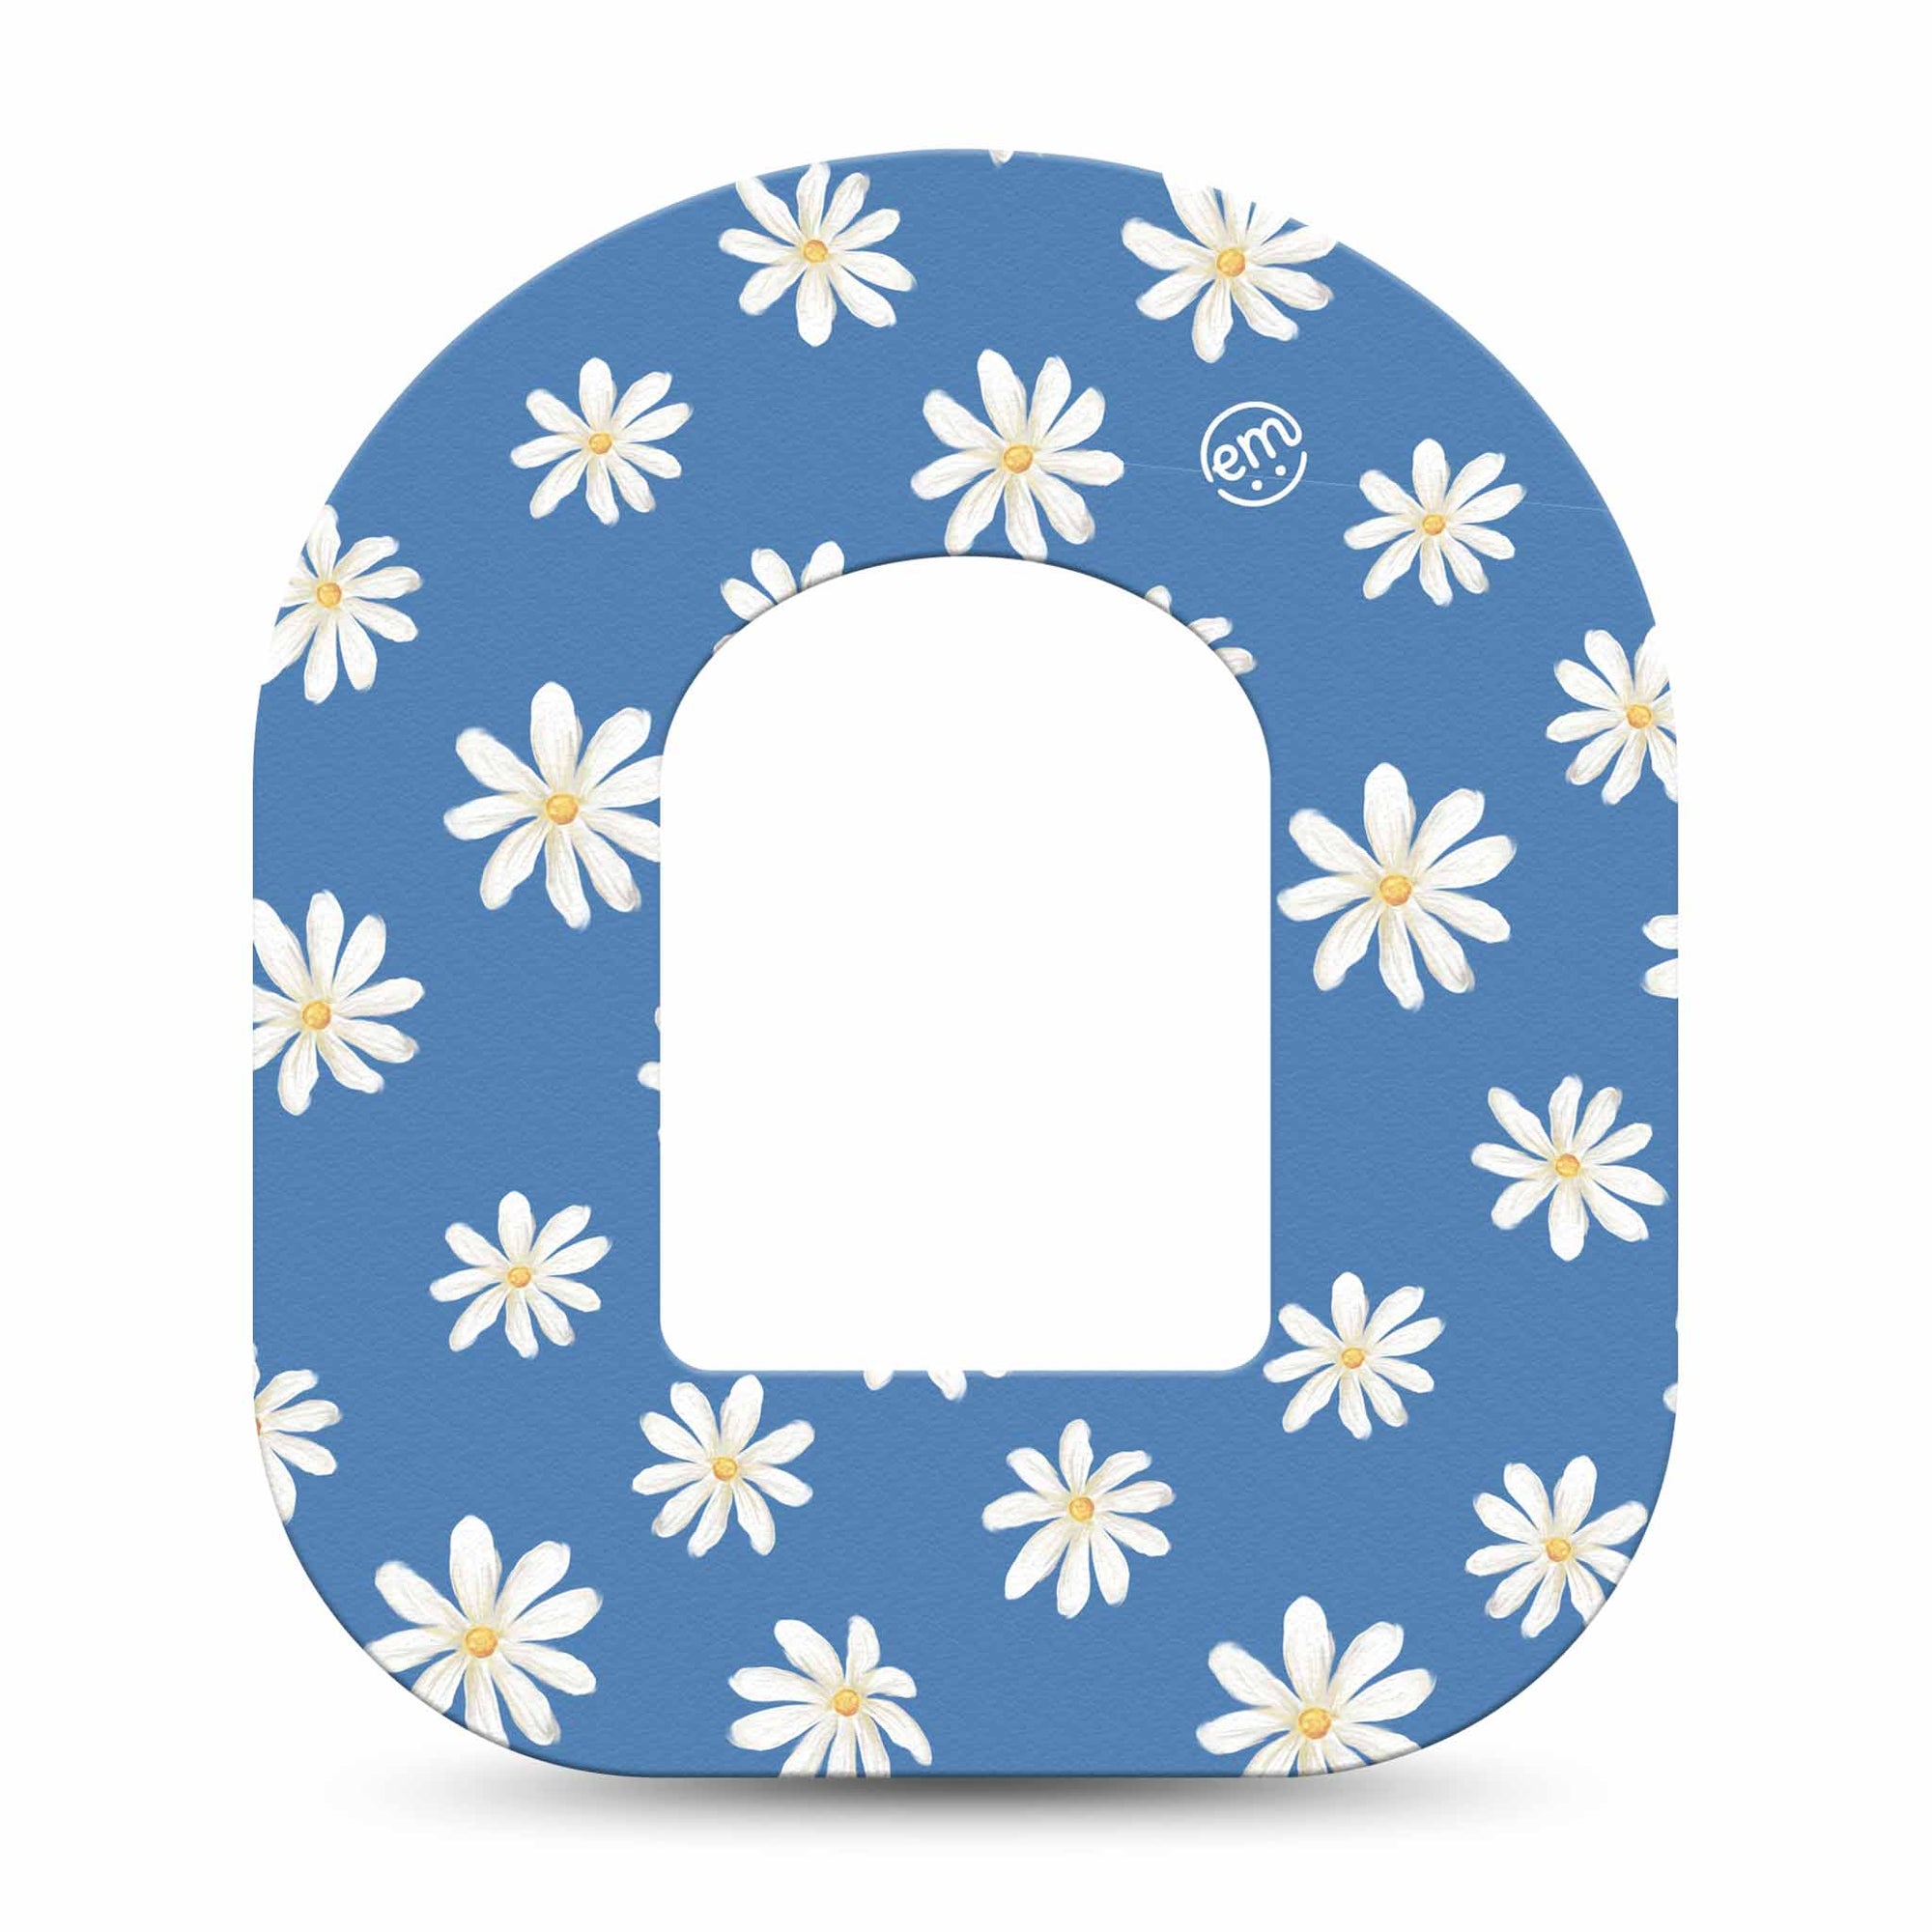 ExpressionMed Painted Daisies OmniPod Tape